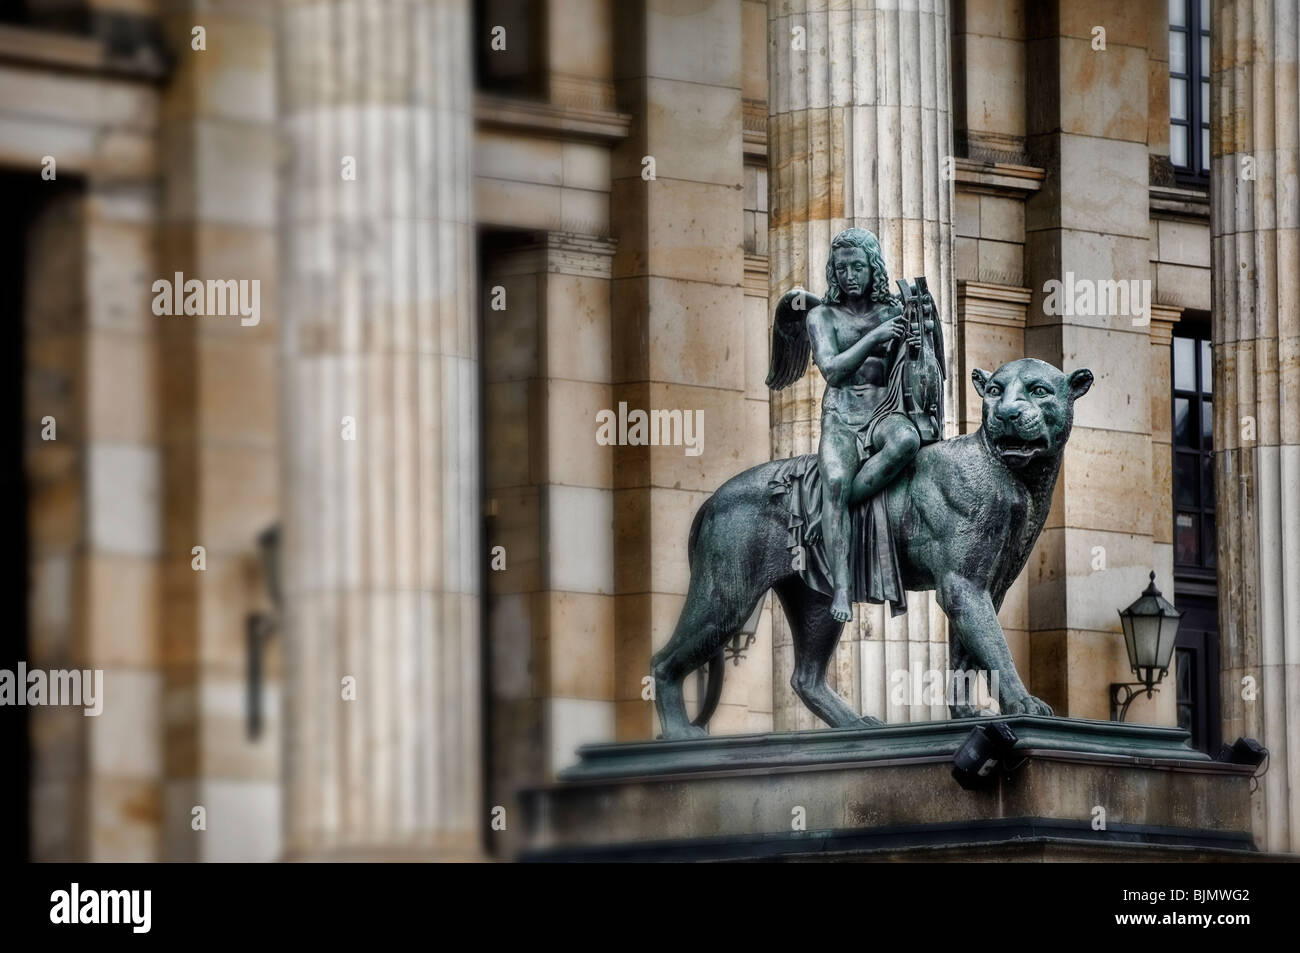 Statue outside the Concert hall Unter den Linden Berlin Germany Europe Stock Photo